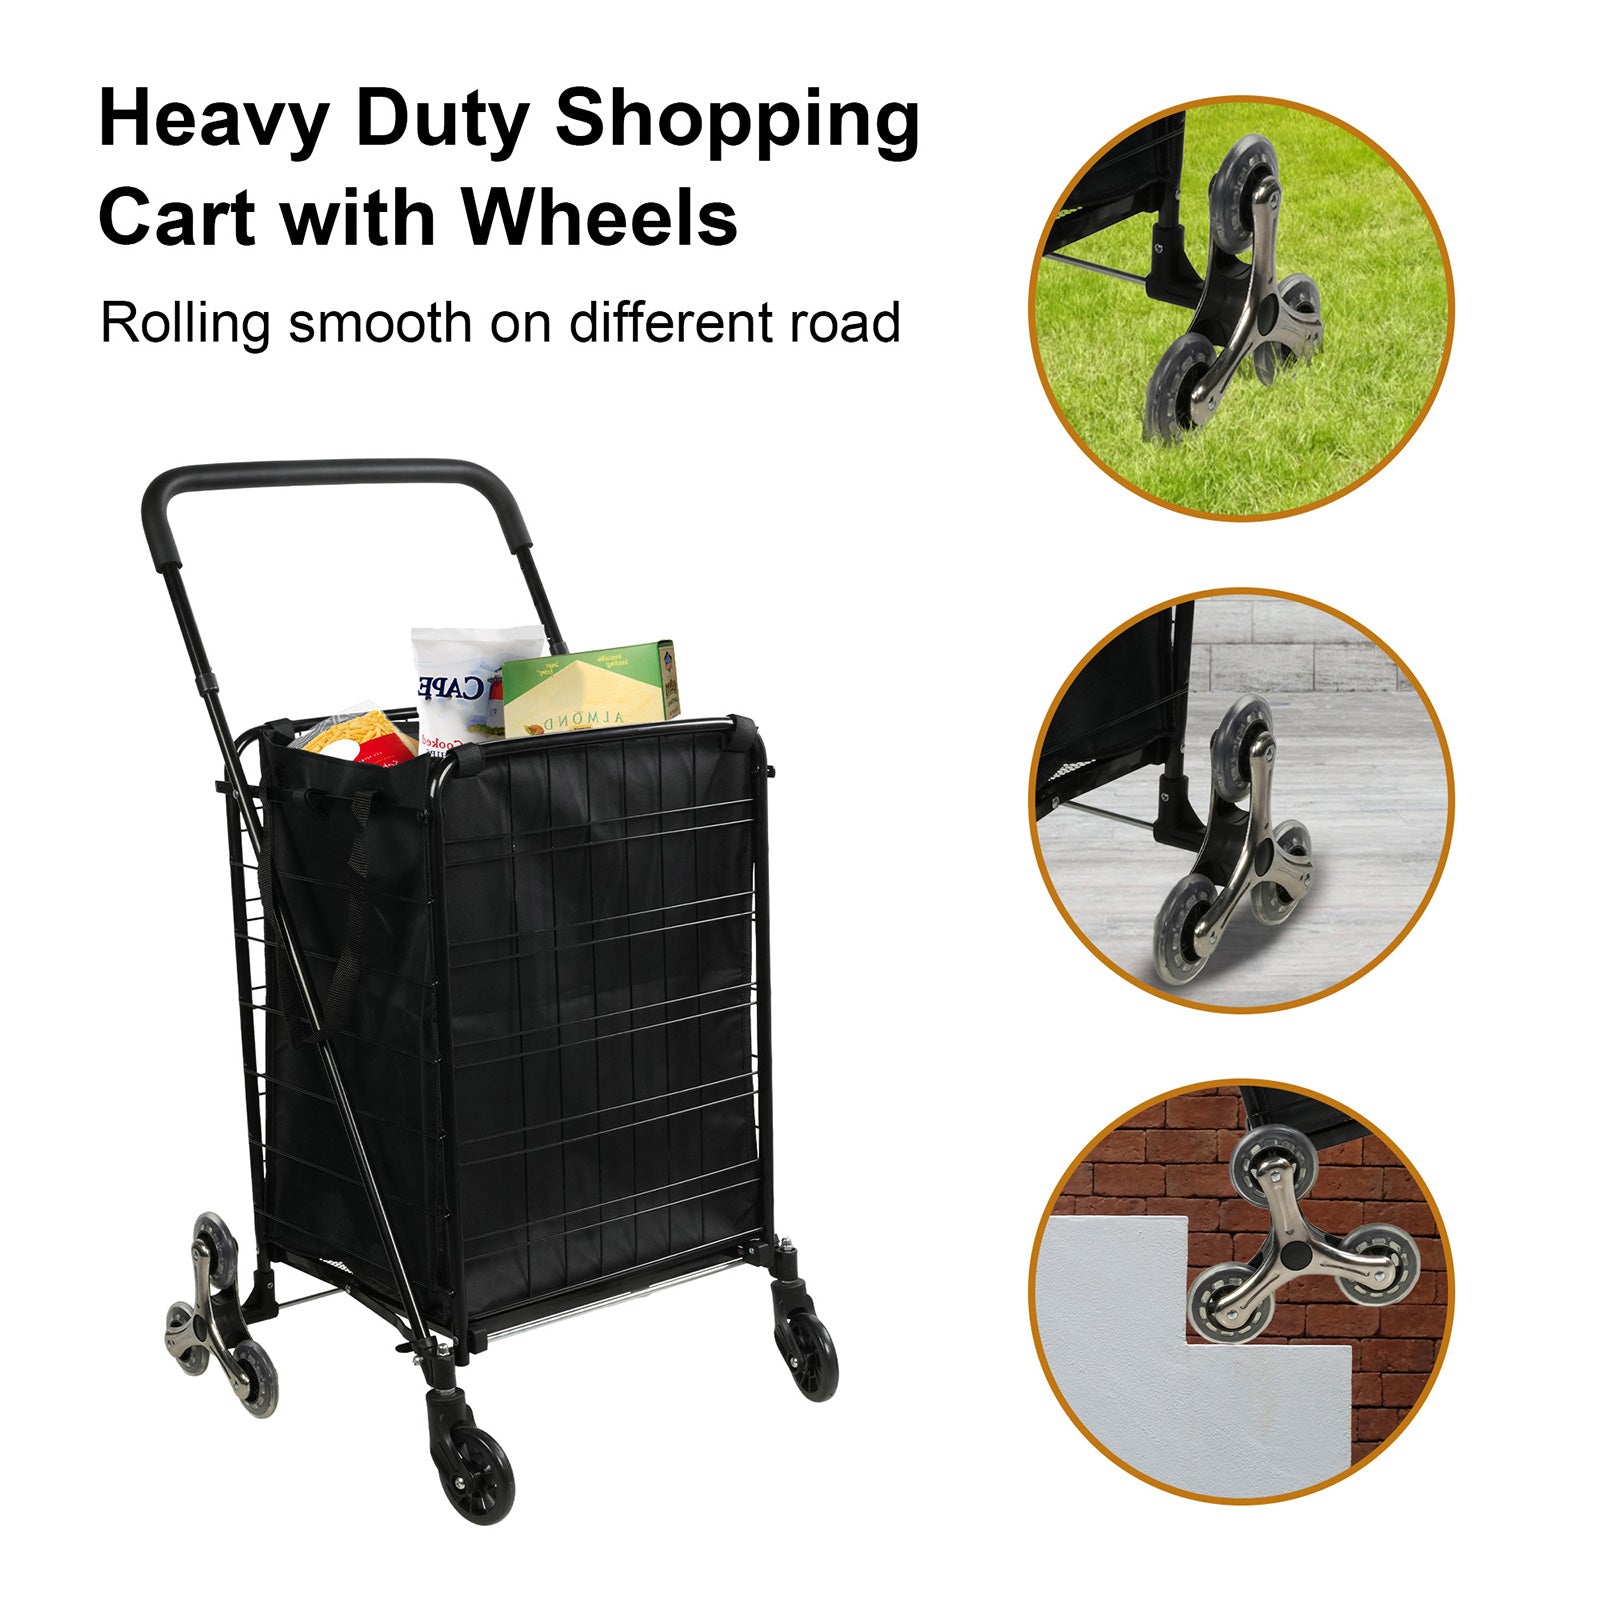 Folding Shopping Cart with Wheels and Removable Cloth Liner Holds Up to 77 Lbs.